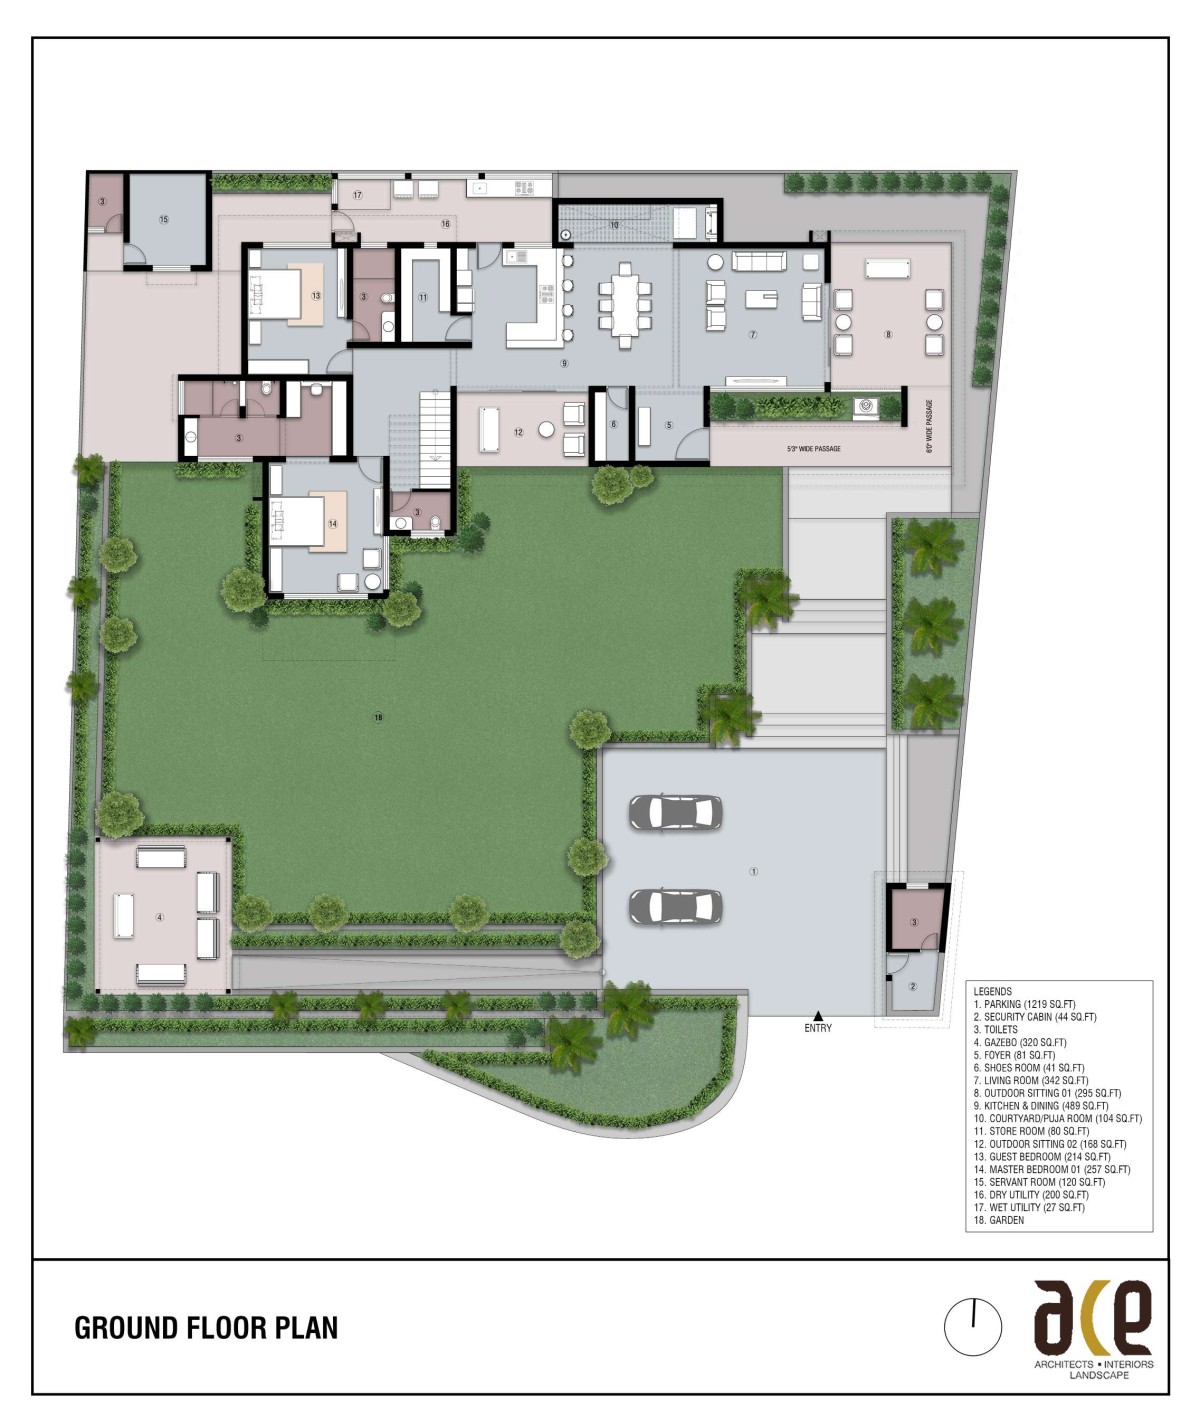 Ground Floor Plan of Anand by Ace Associates